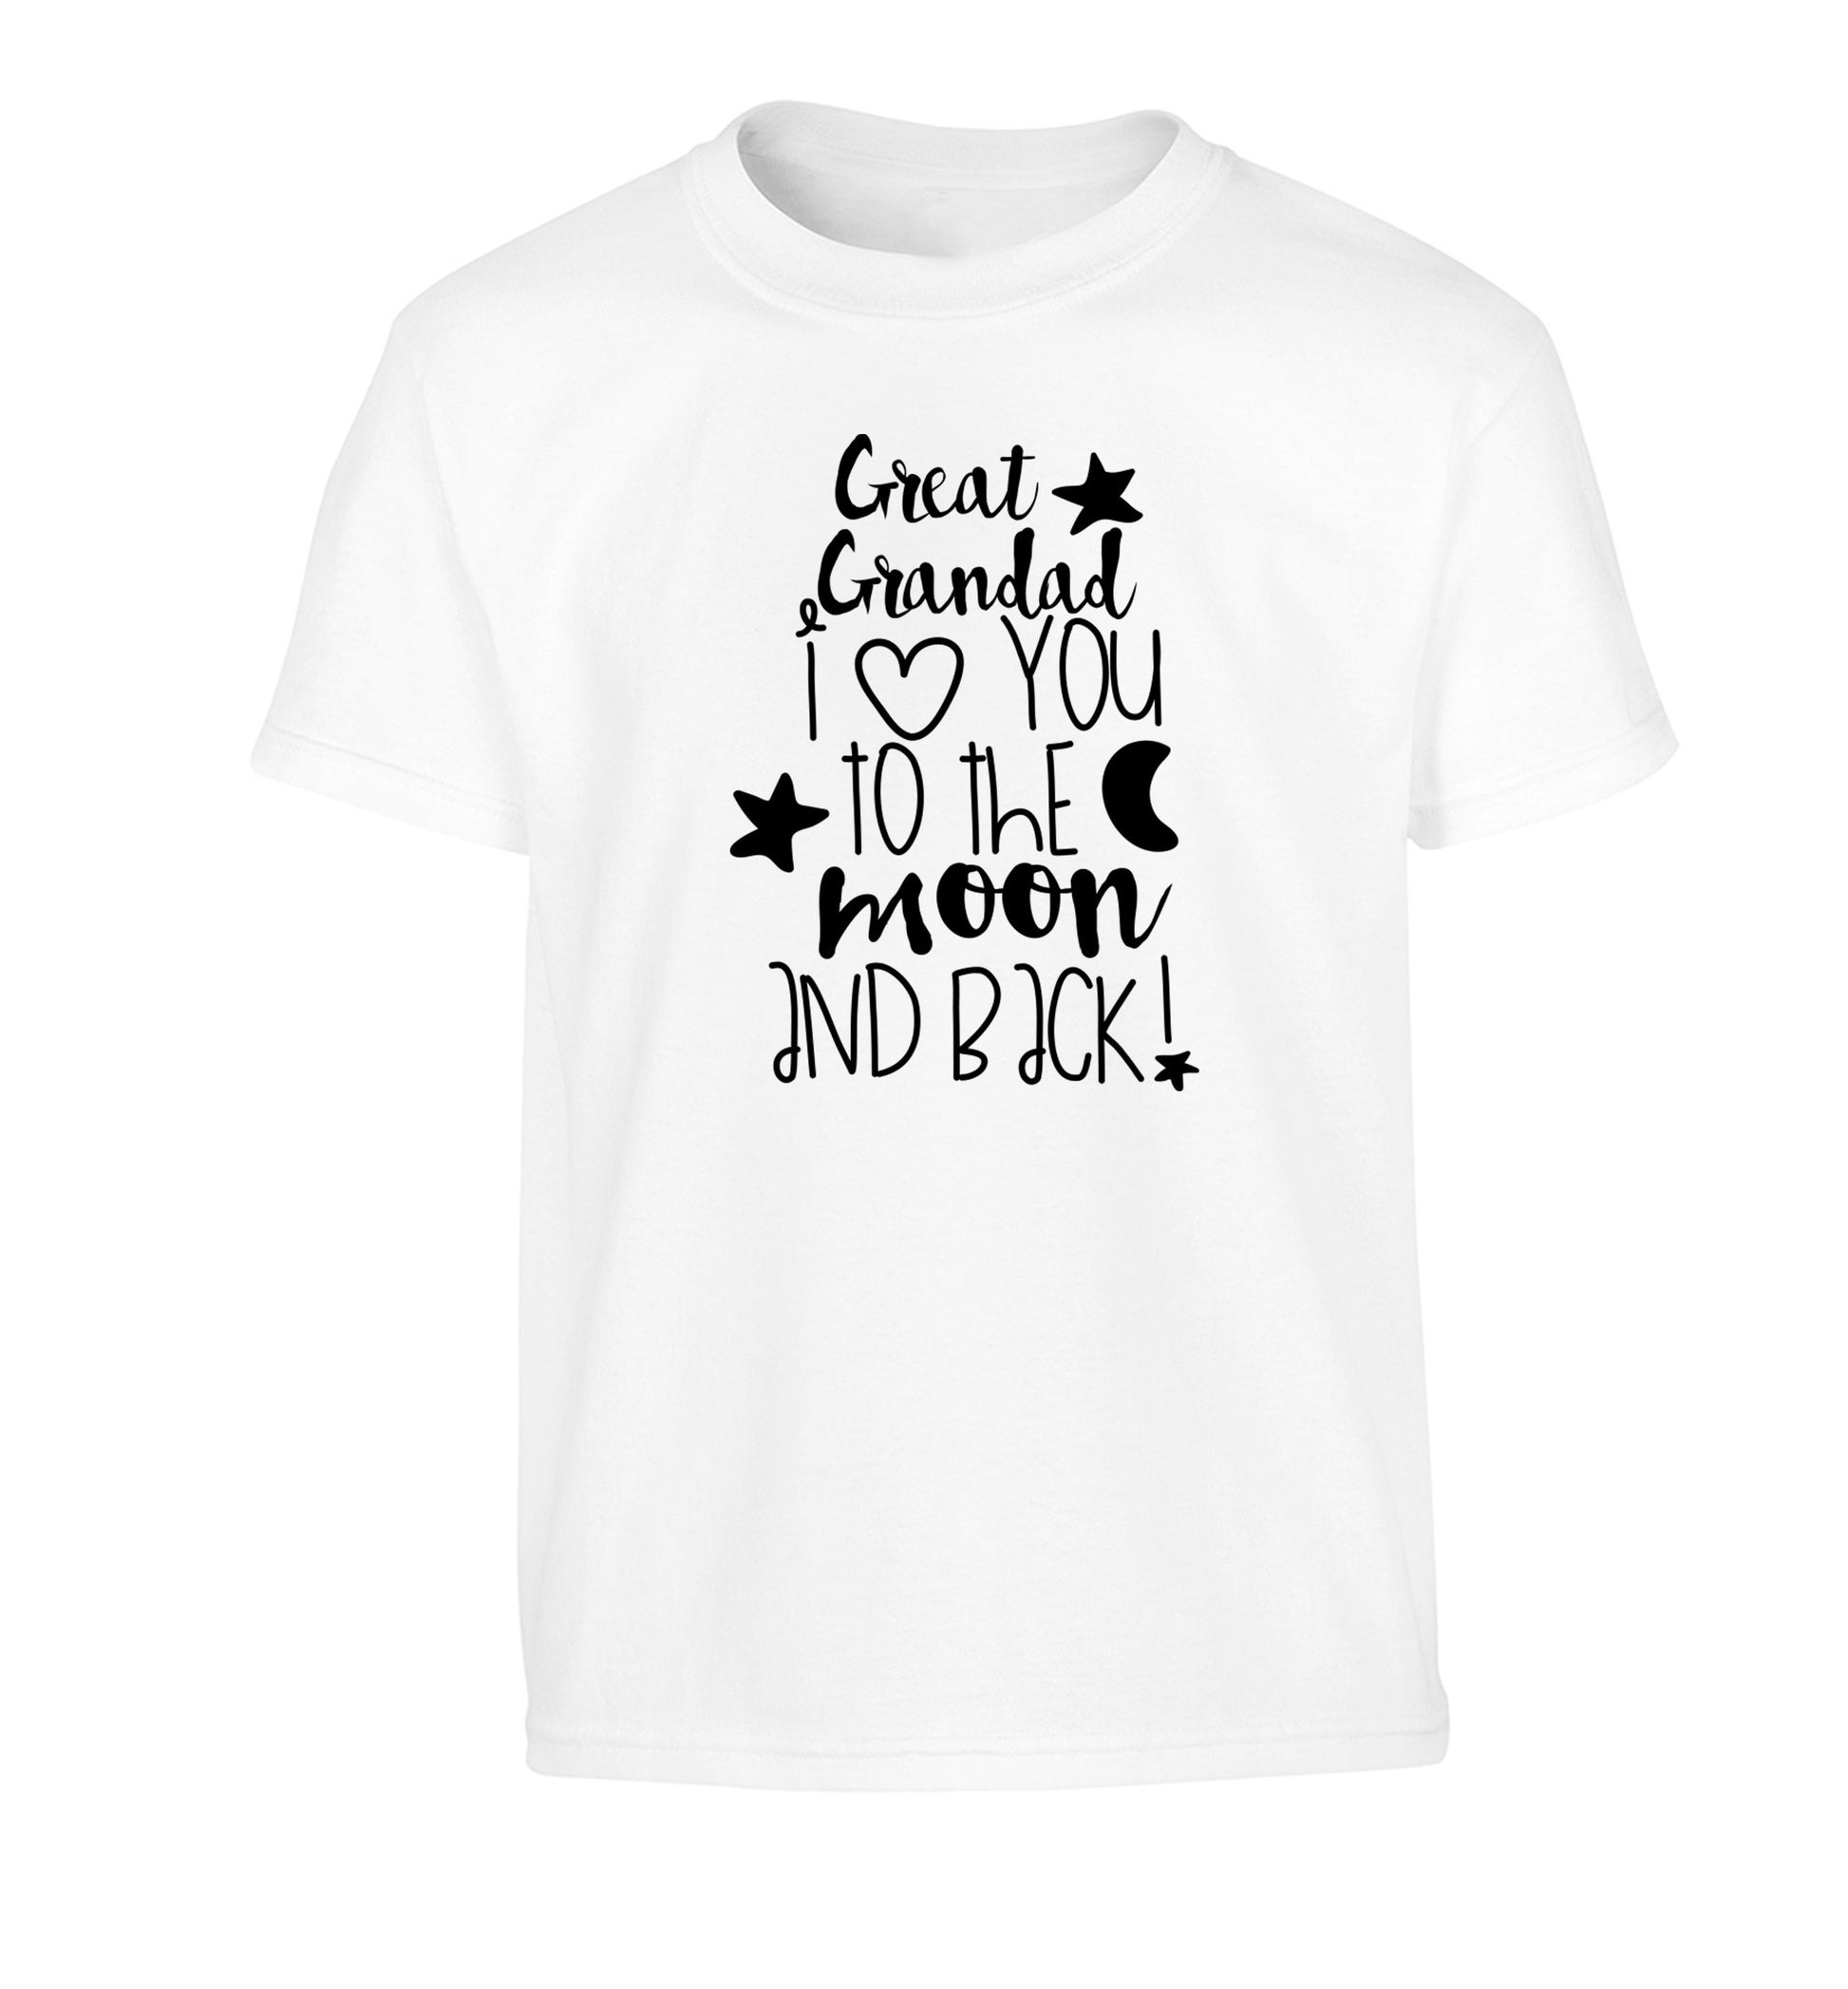 Great Grandad I love you to the moon and back Children's white Tshirt 12-14 Years